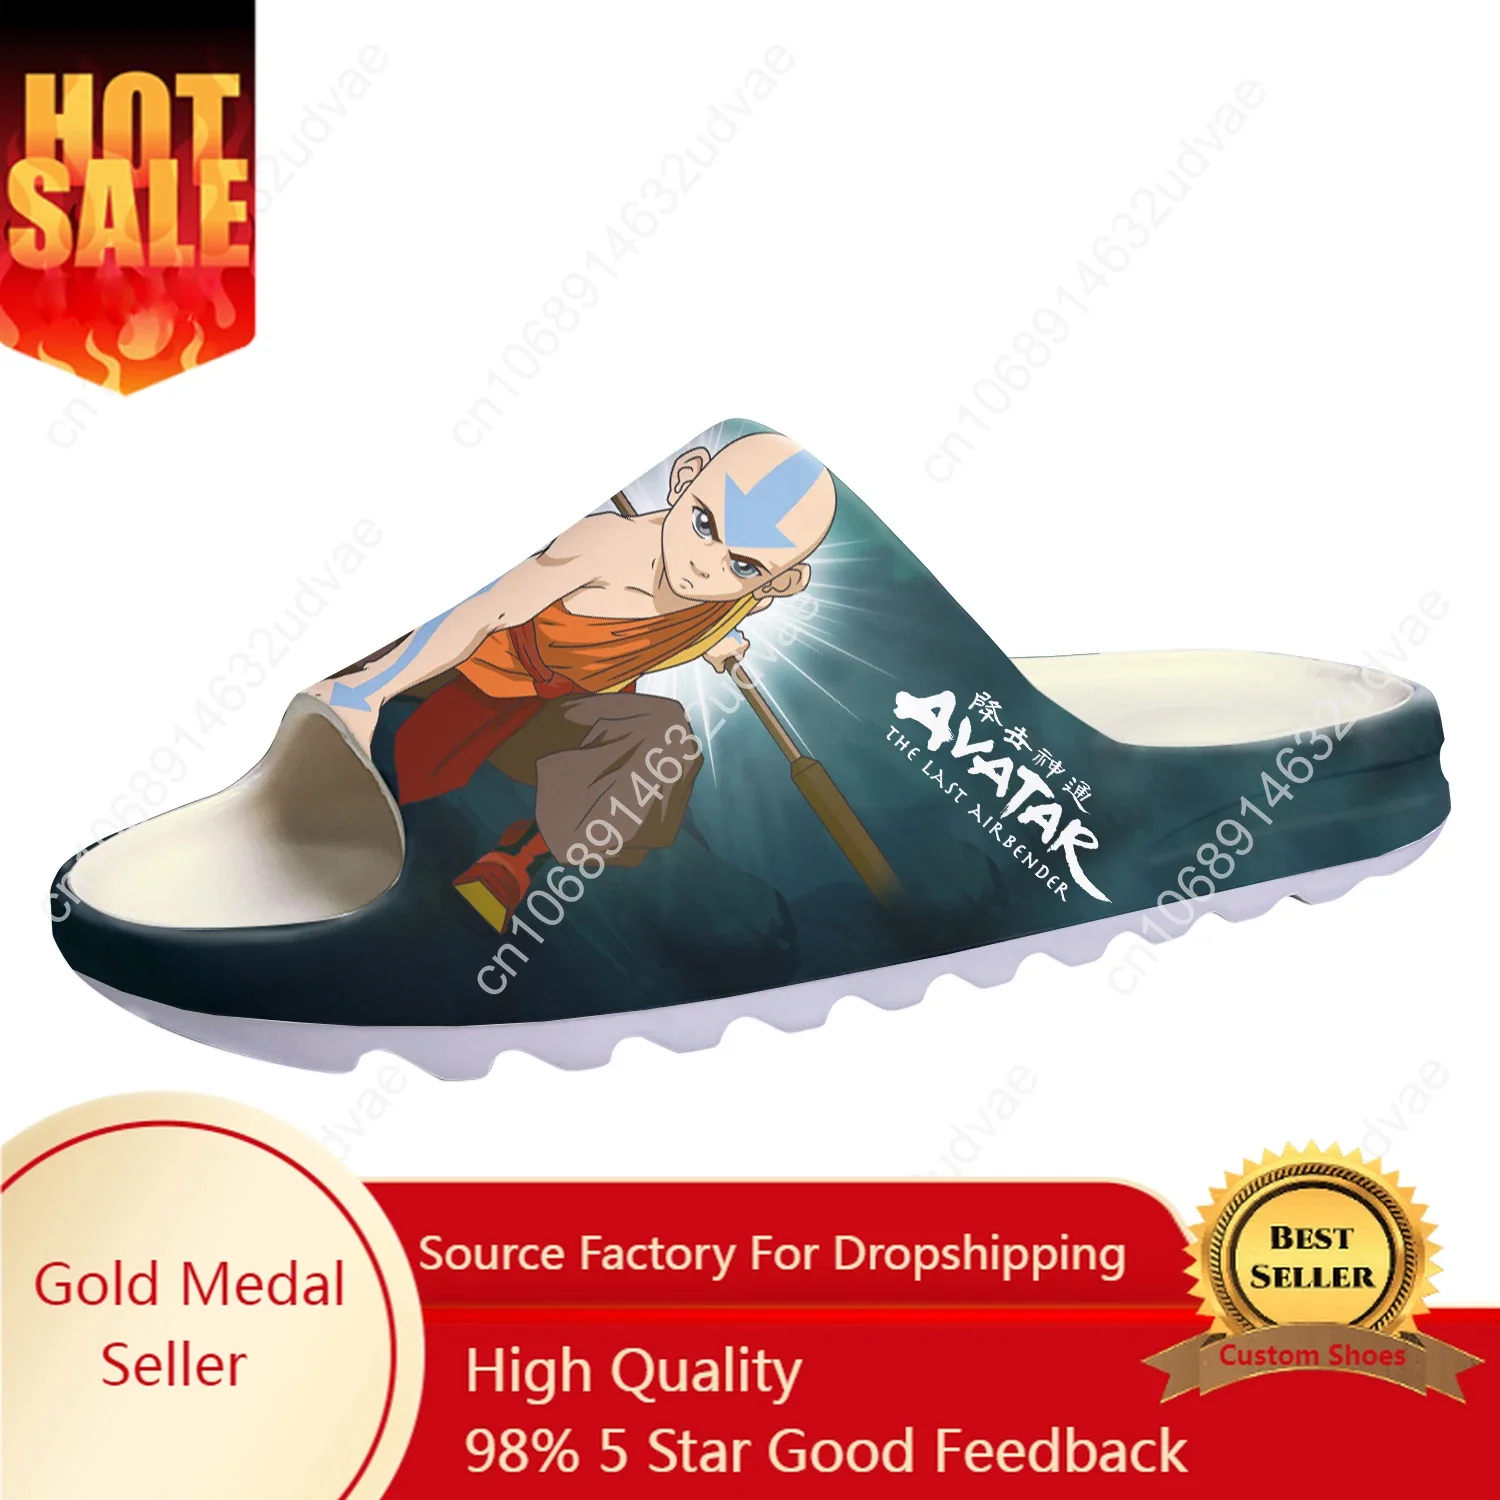 

Avatar The Last Airbender Soft Sole Sllipers Home Clogs Customized Water Shoes Men Women Teenager Step On Shit Sandals